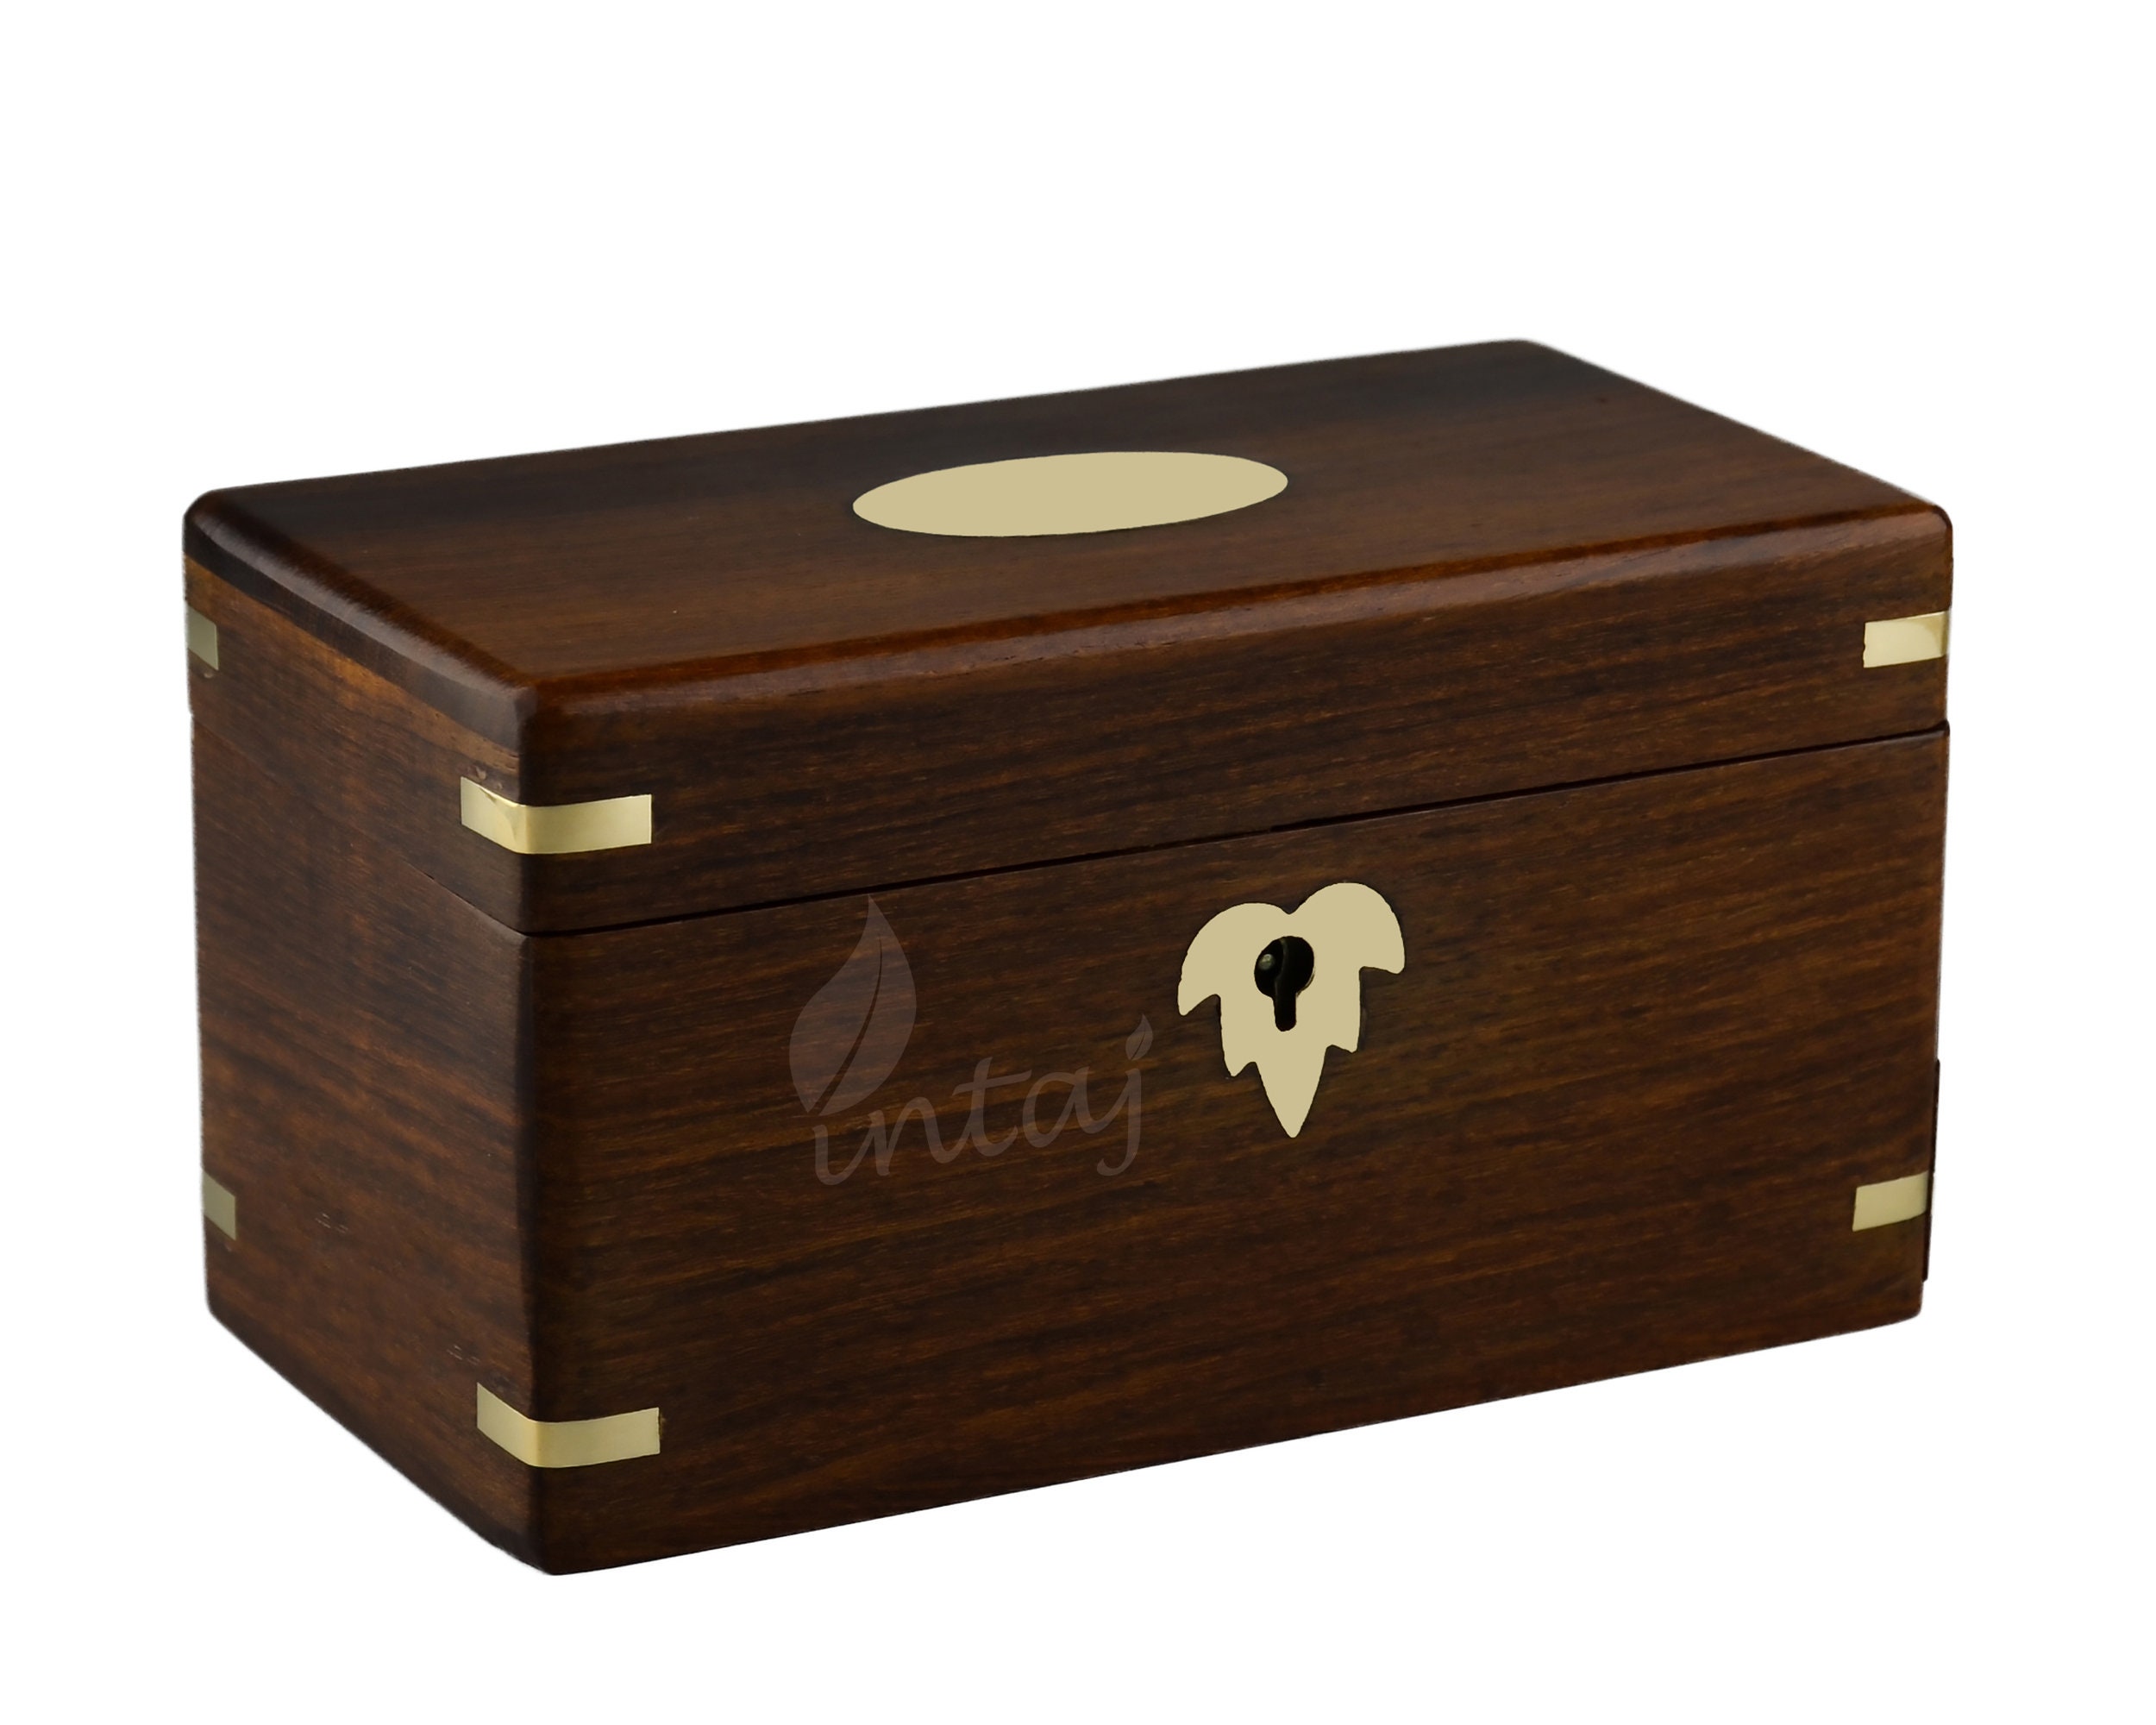 Handmade Wooden Owl Puzzle Box/Jewelry Box/Stash Box/Brain Teaser with Secret Compartment 